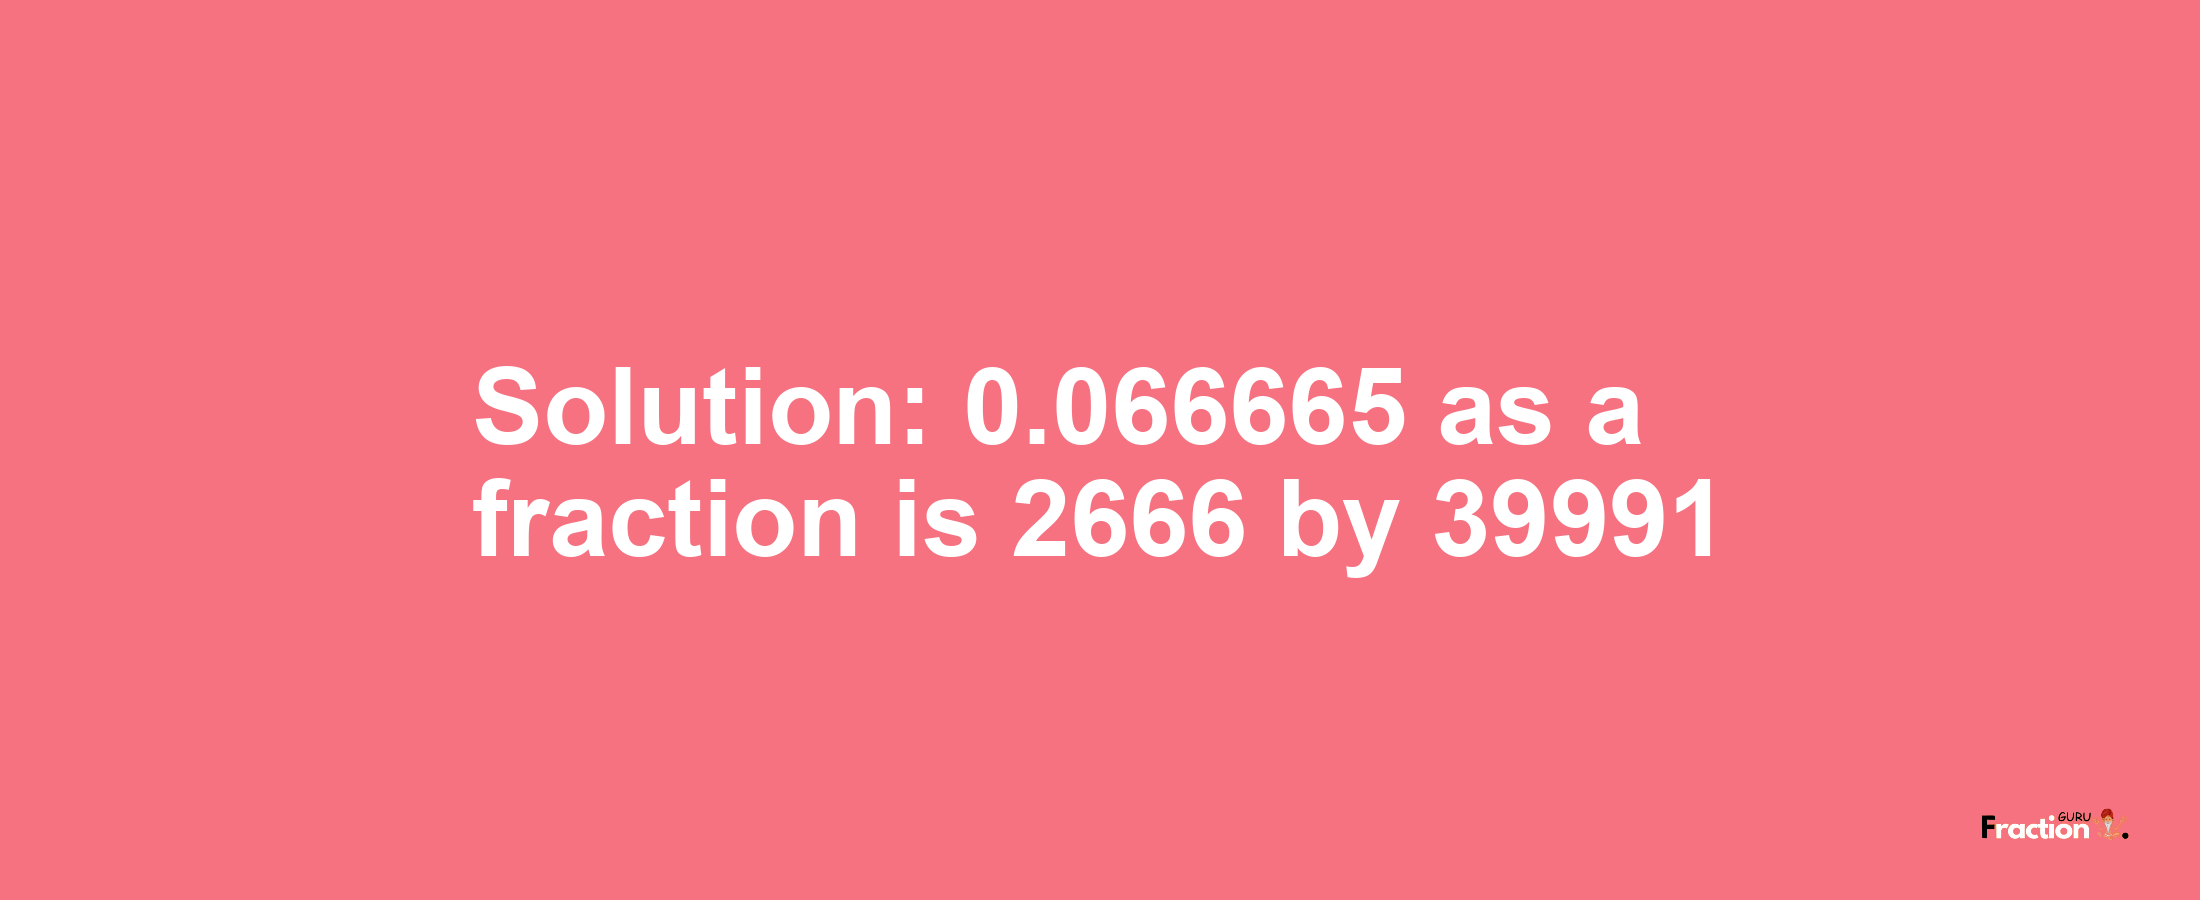 Solution:0.066665 as a fraction is 2666/39991